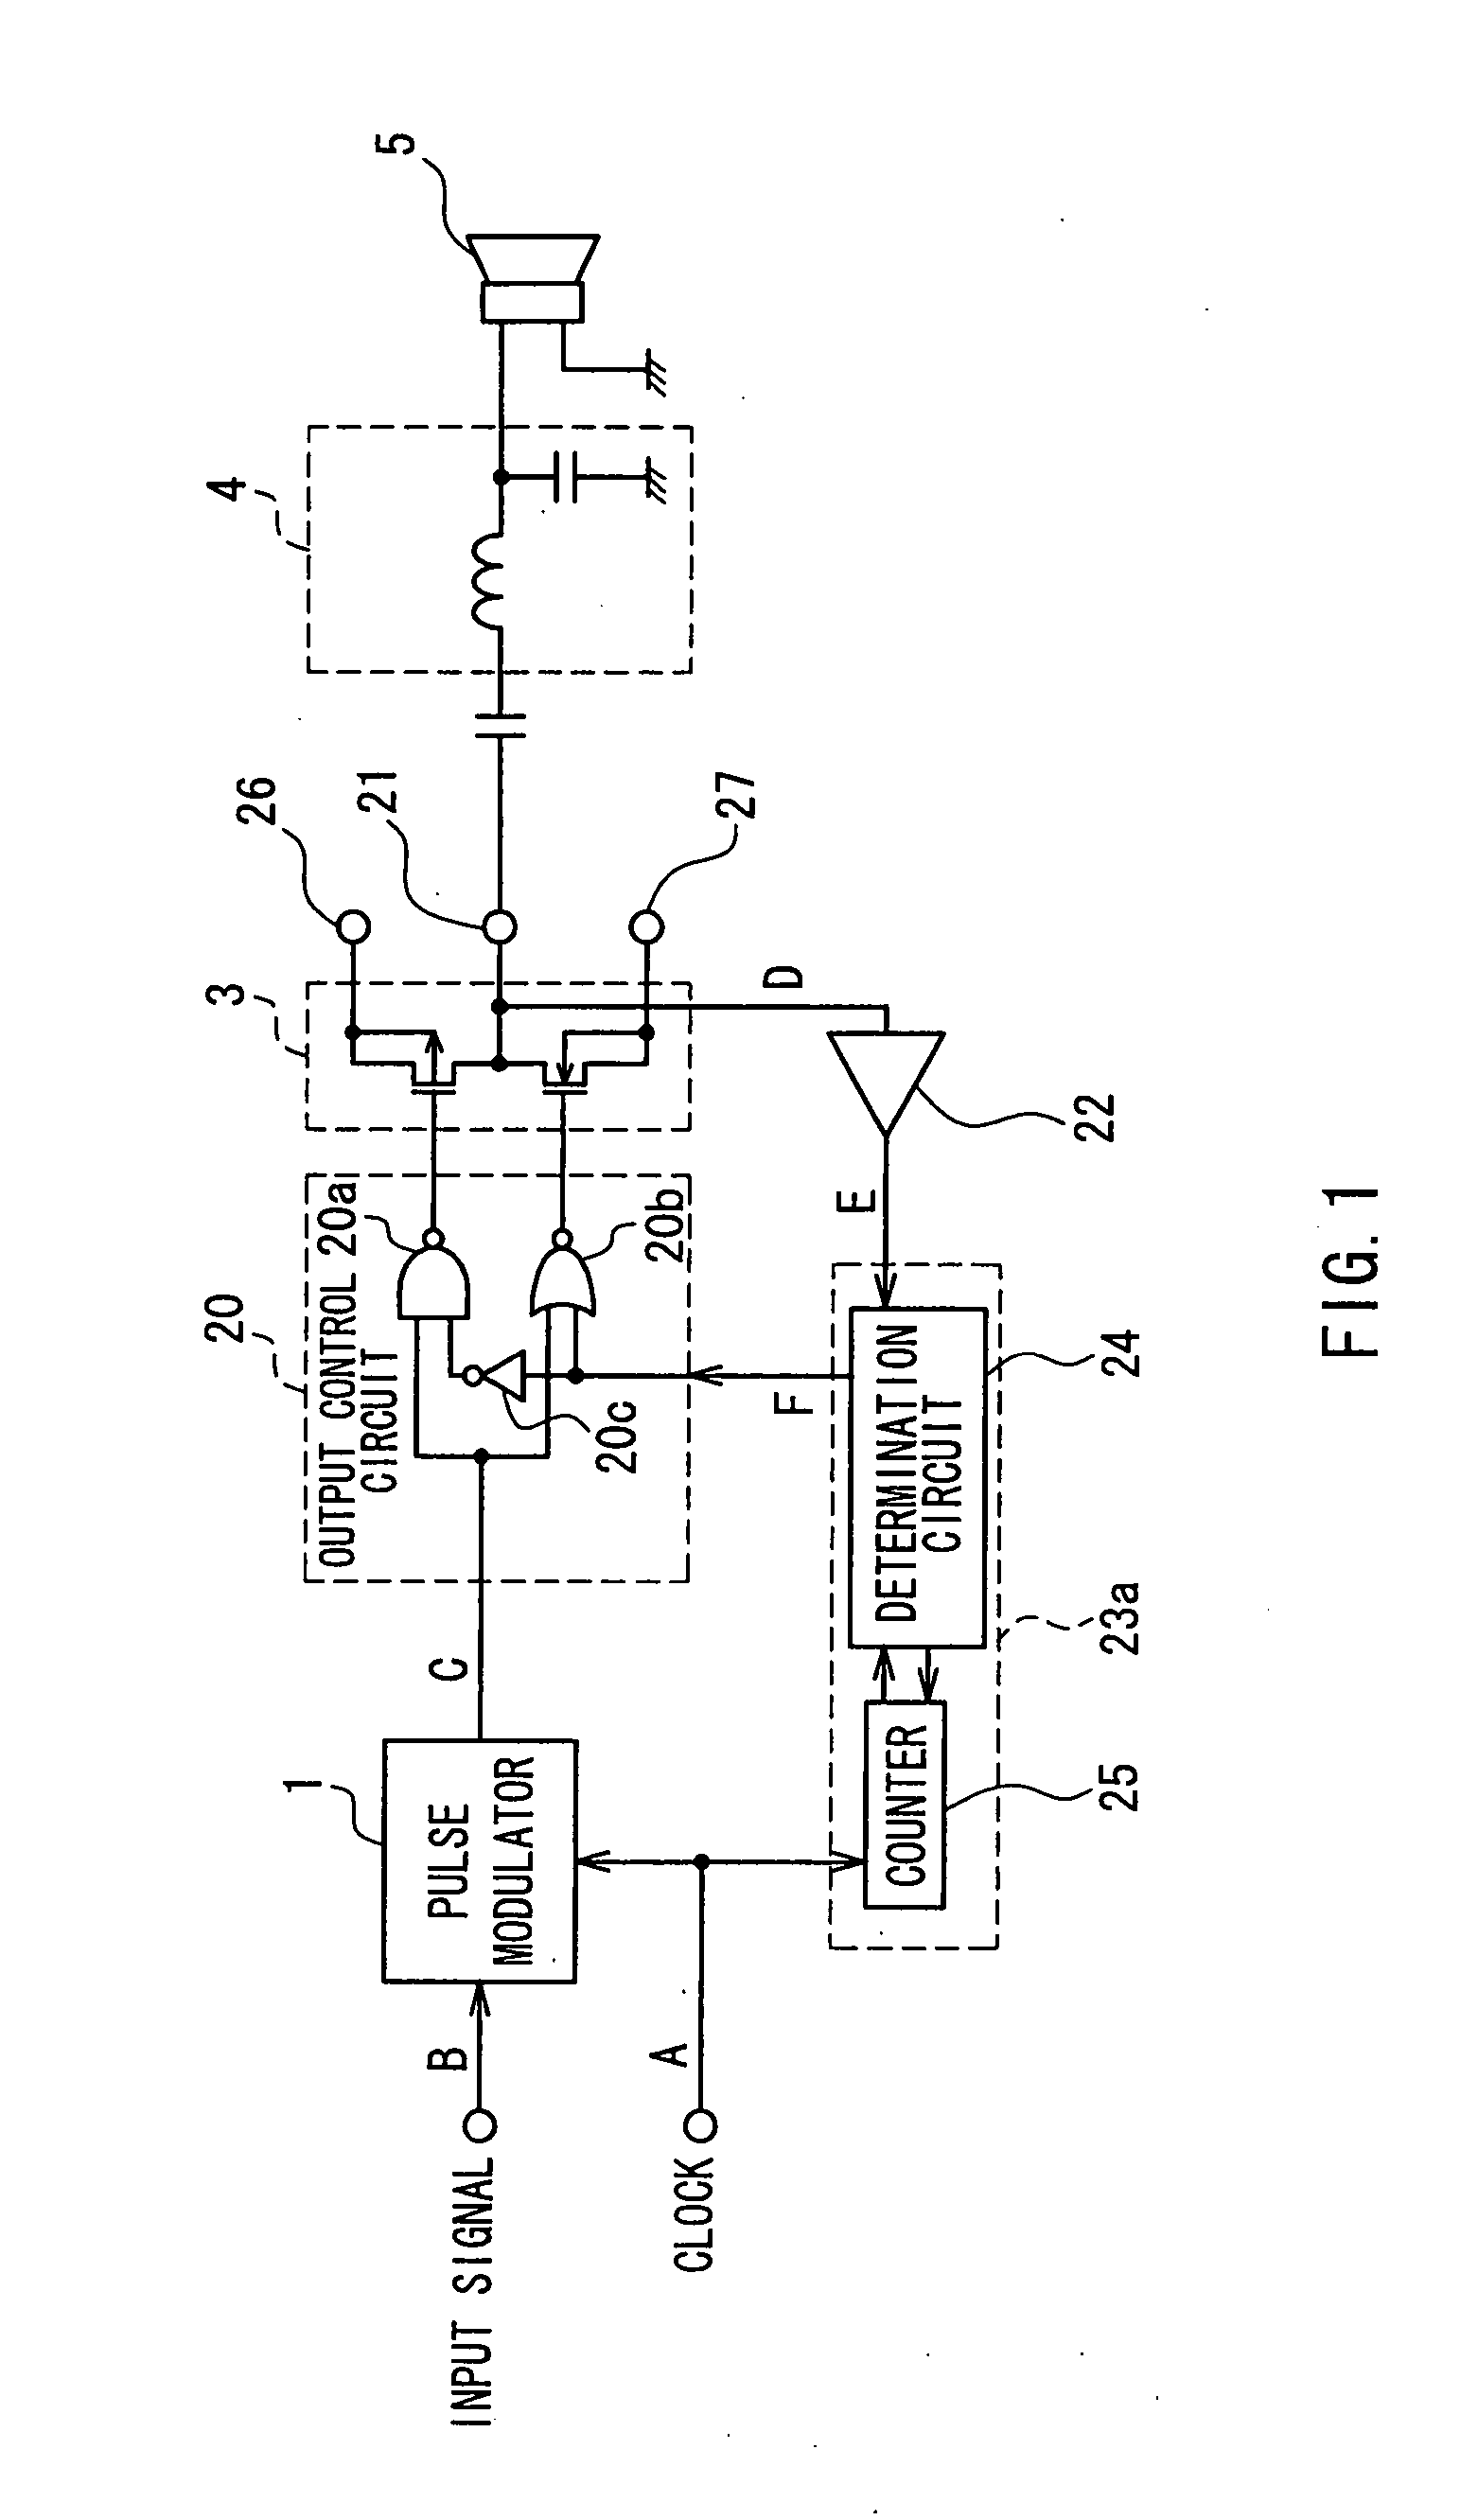 Pulse modulation type electric power amplifier